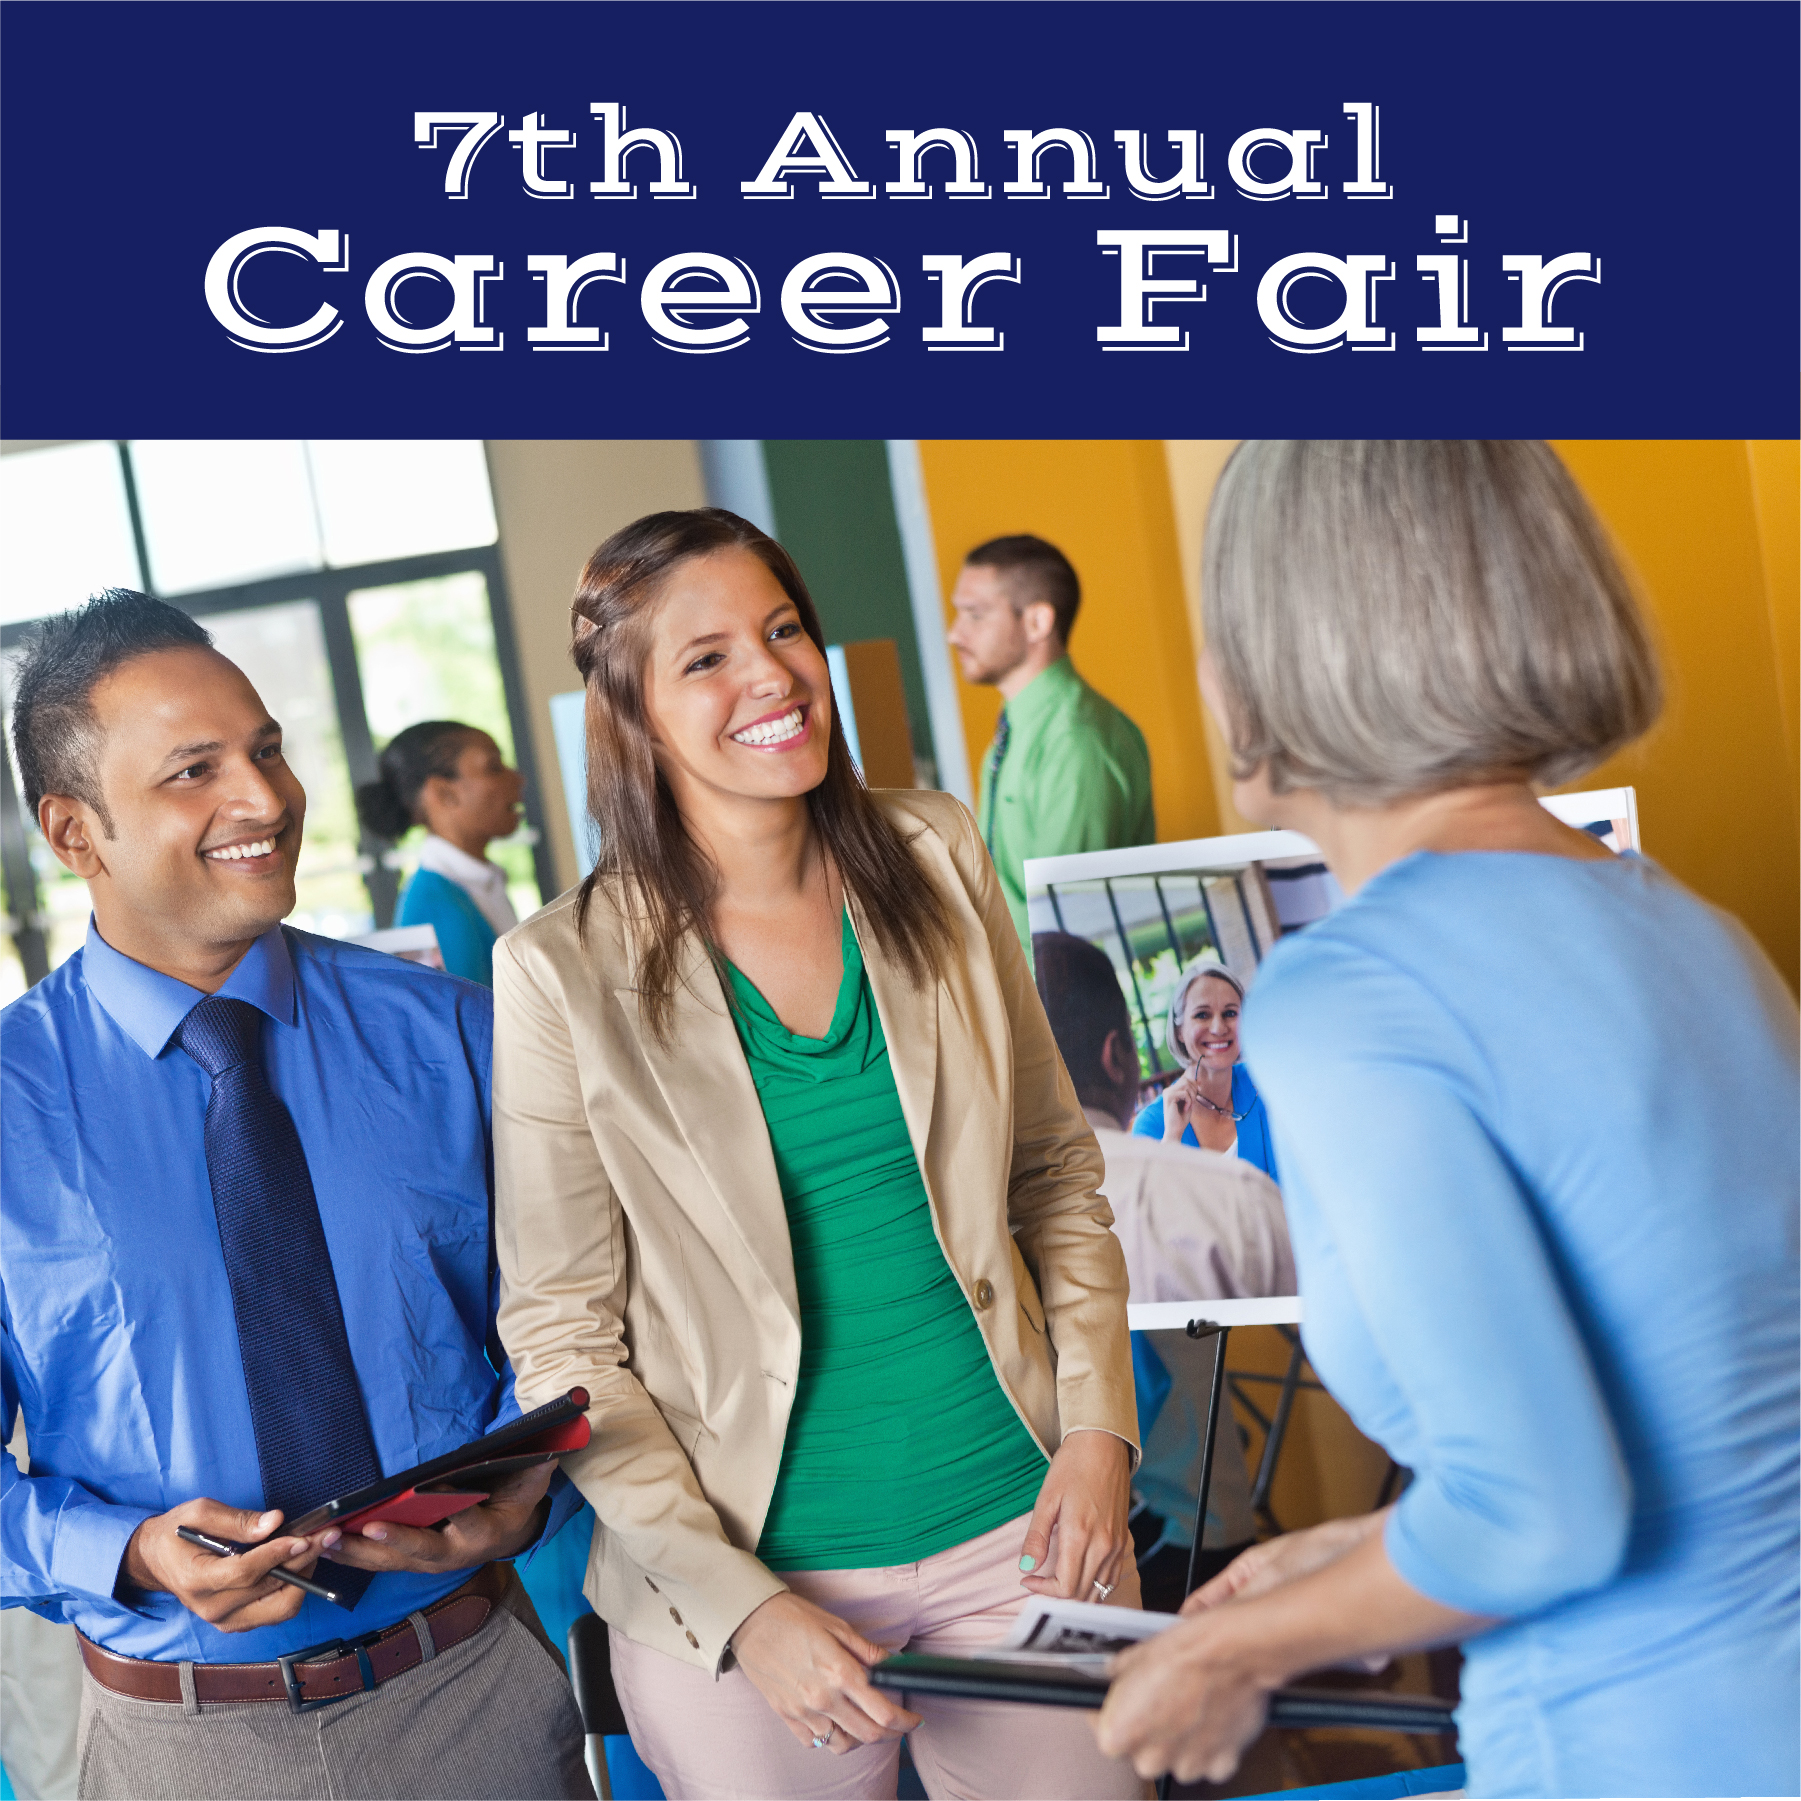 People having a discussion at a career fair